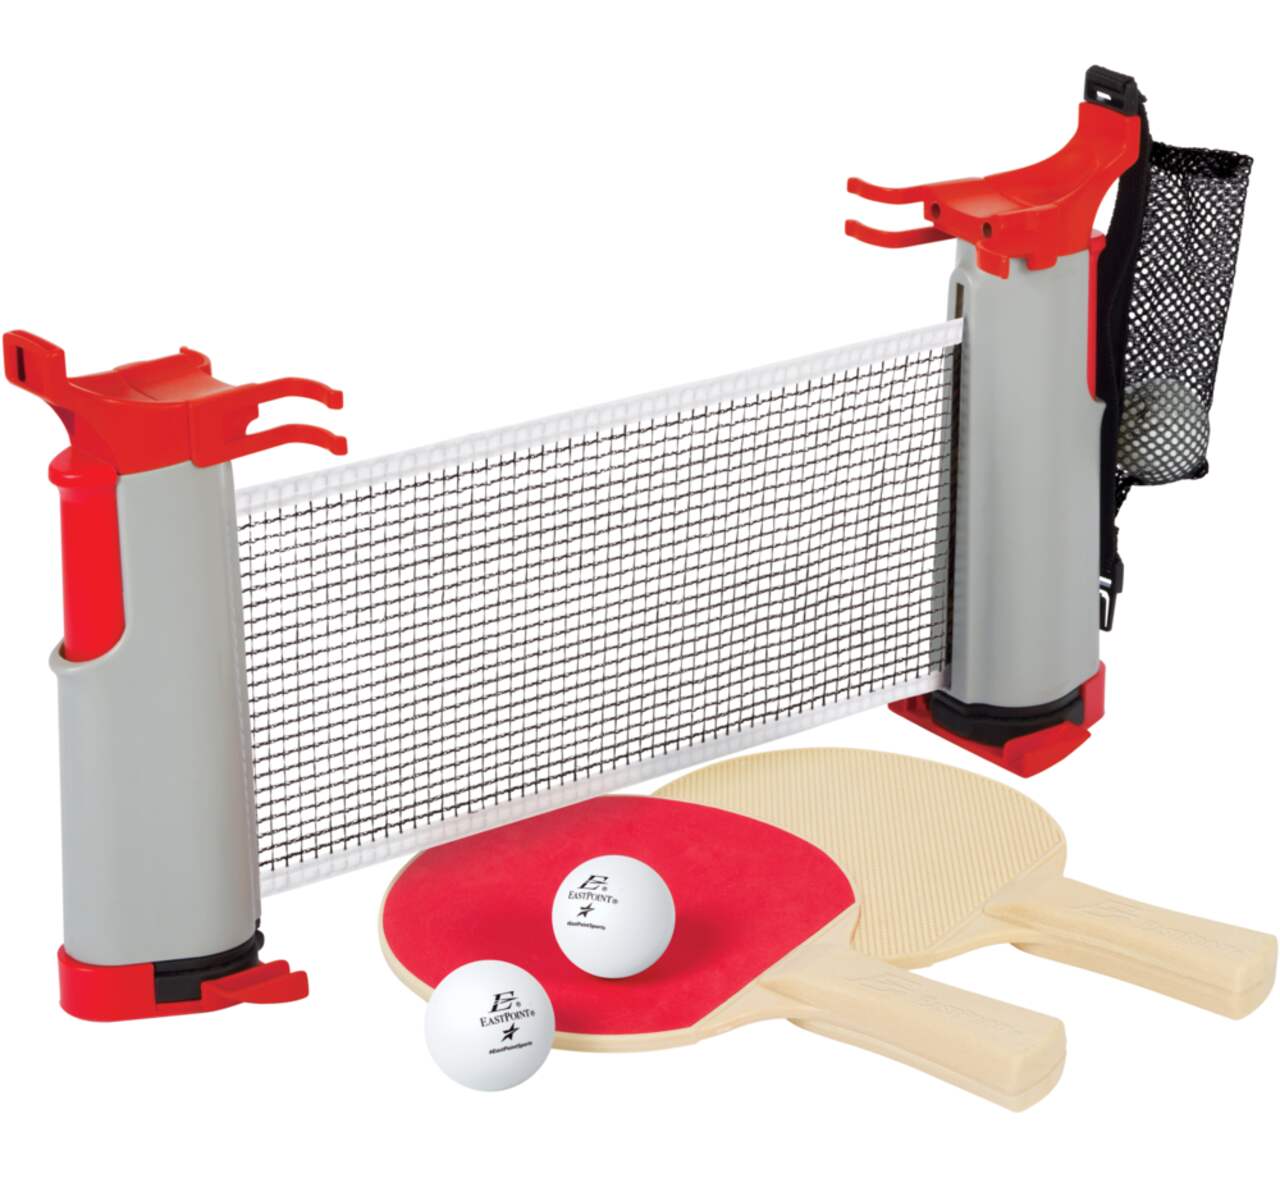 https://media-www.canadiantire.ca/product/playing/team-sports-and-golf/sports-equipment-accessories/0841231/everywhere-table-tennis-090a7b63-9f93-4ed7-b321-e015c30dbc59.png?imdensity=1&imwidth=1244&impolicy=mZoom